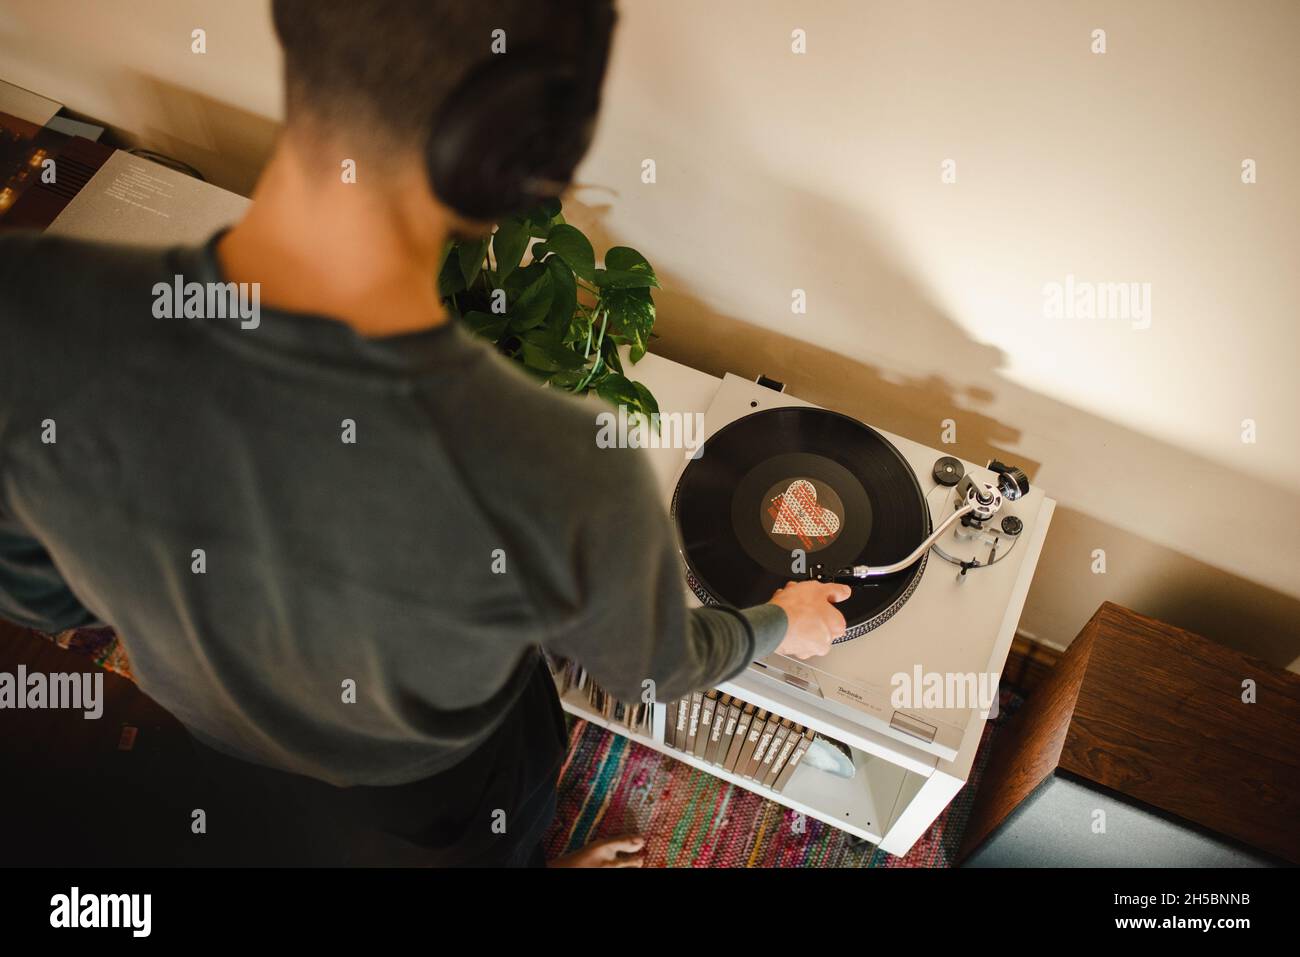 Young millennial mixed-race man puts needle on vinyl record, listening to music with headphones on in his apartment. Aerial view oflistening to music Stock Photo